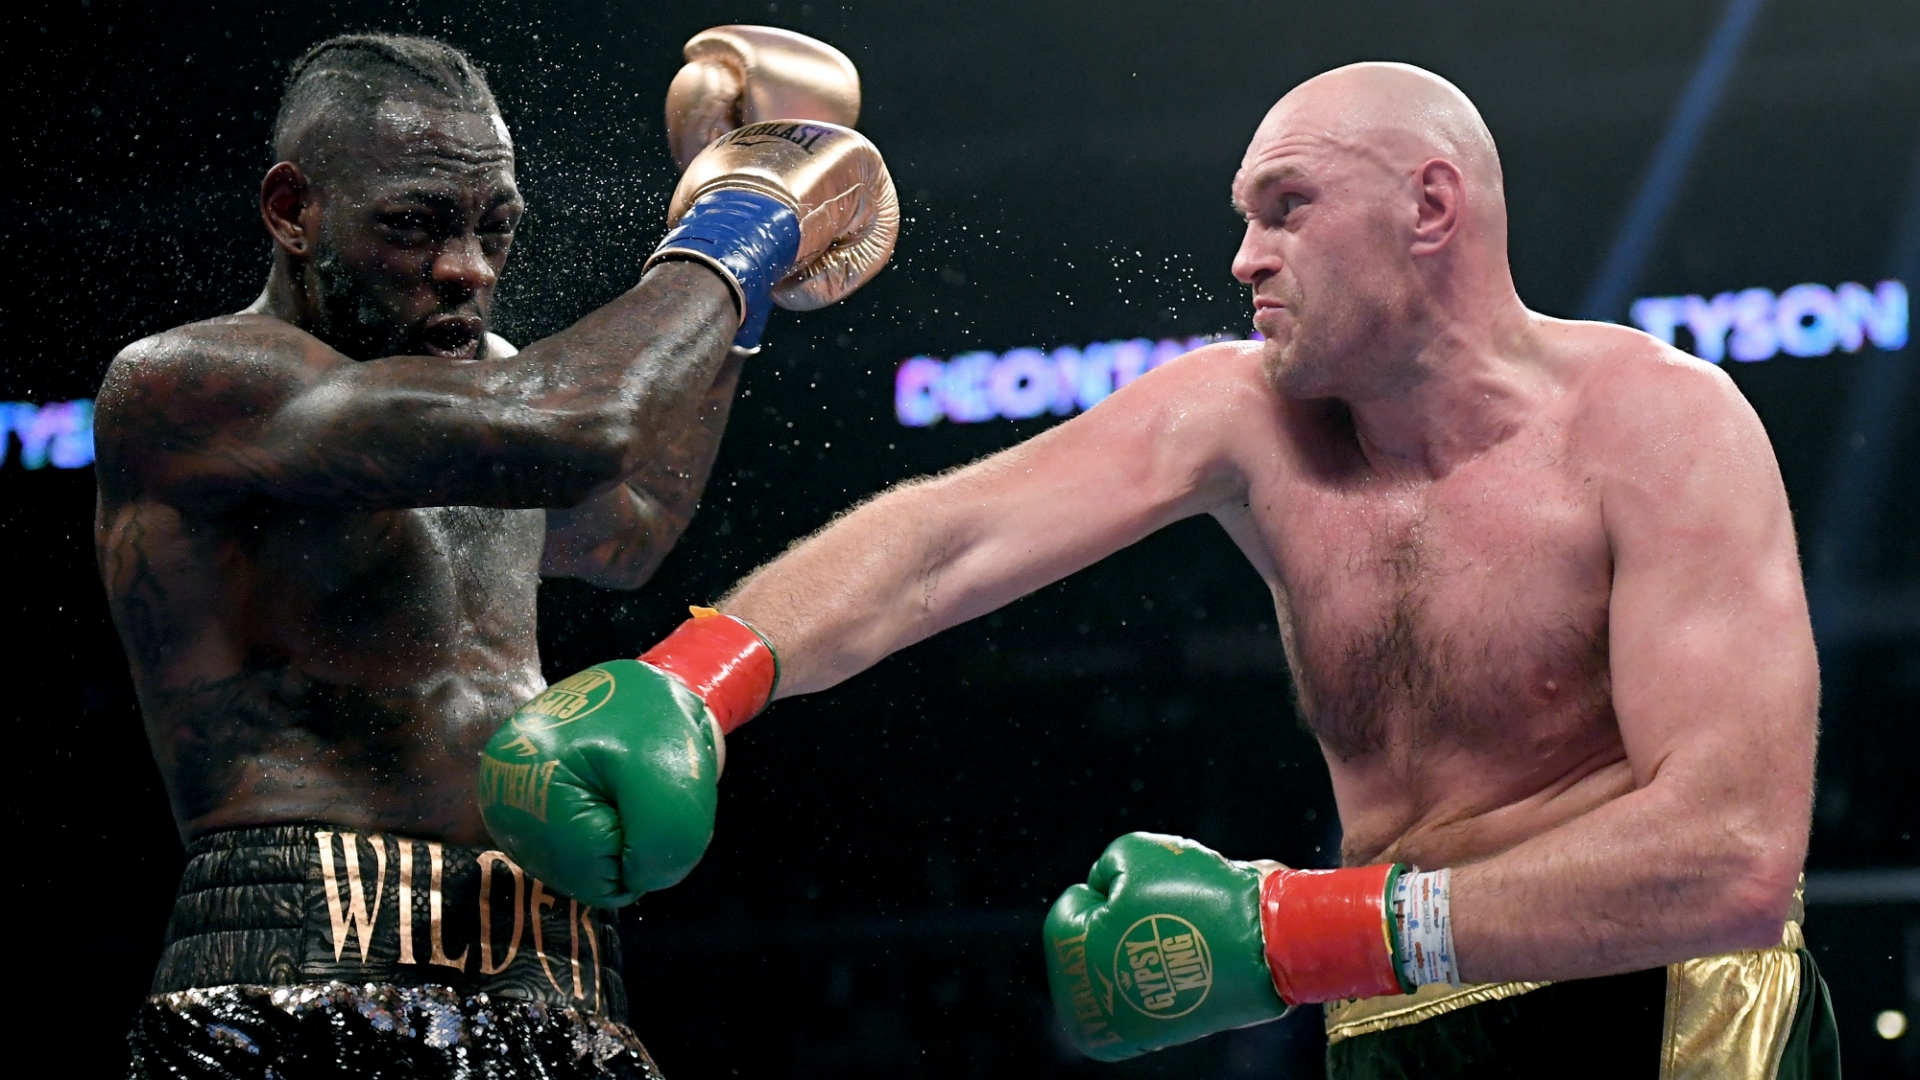 Tyson Fury expects Deontay Wilder rematch in March or April 2020 - The Ring